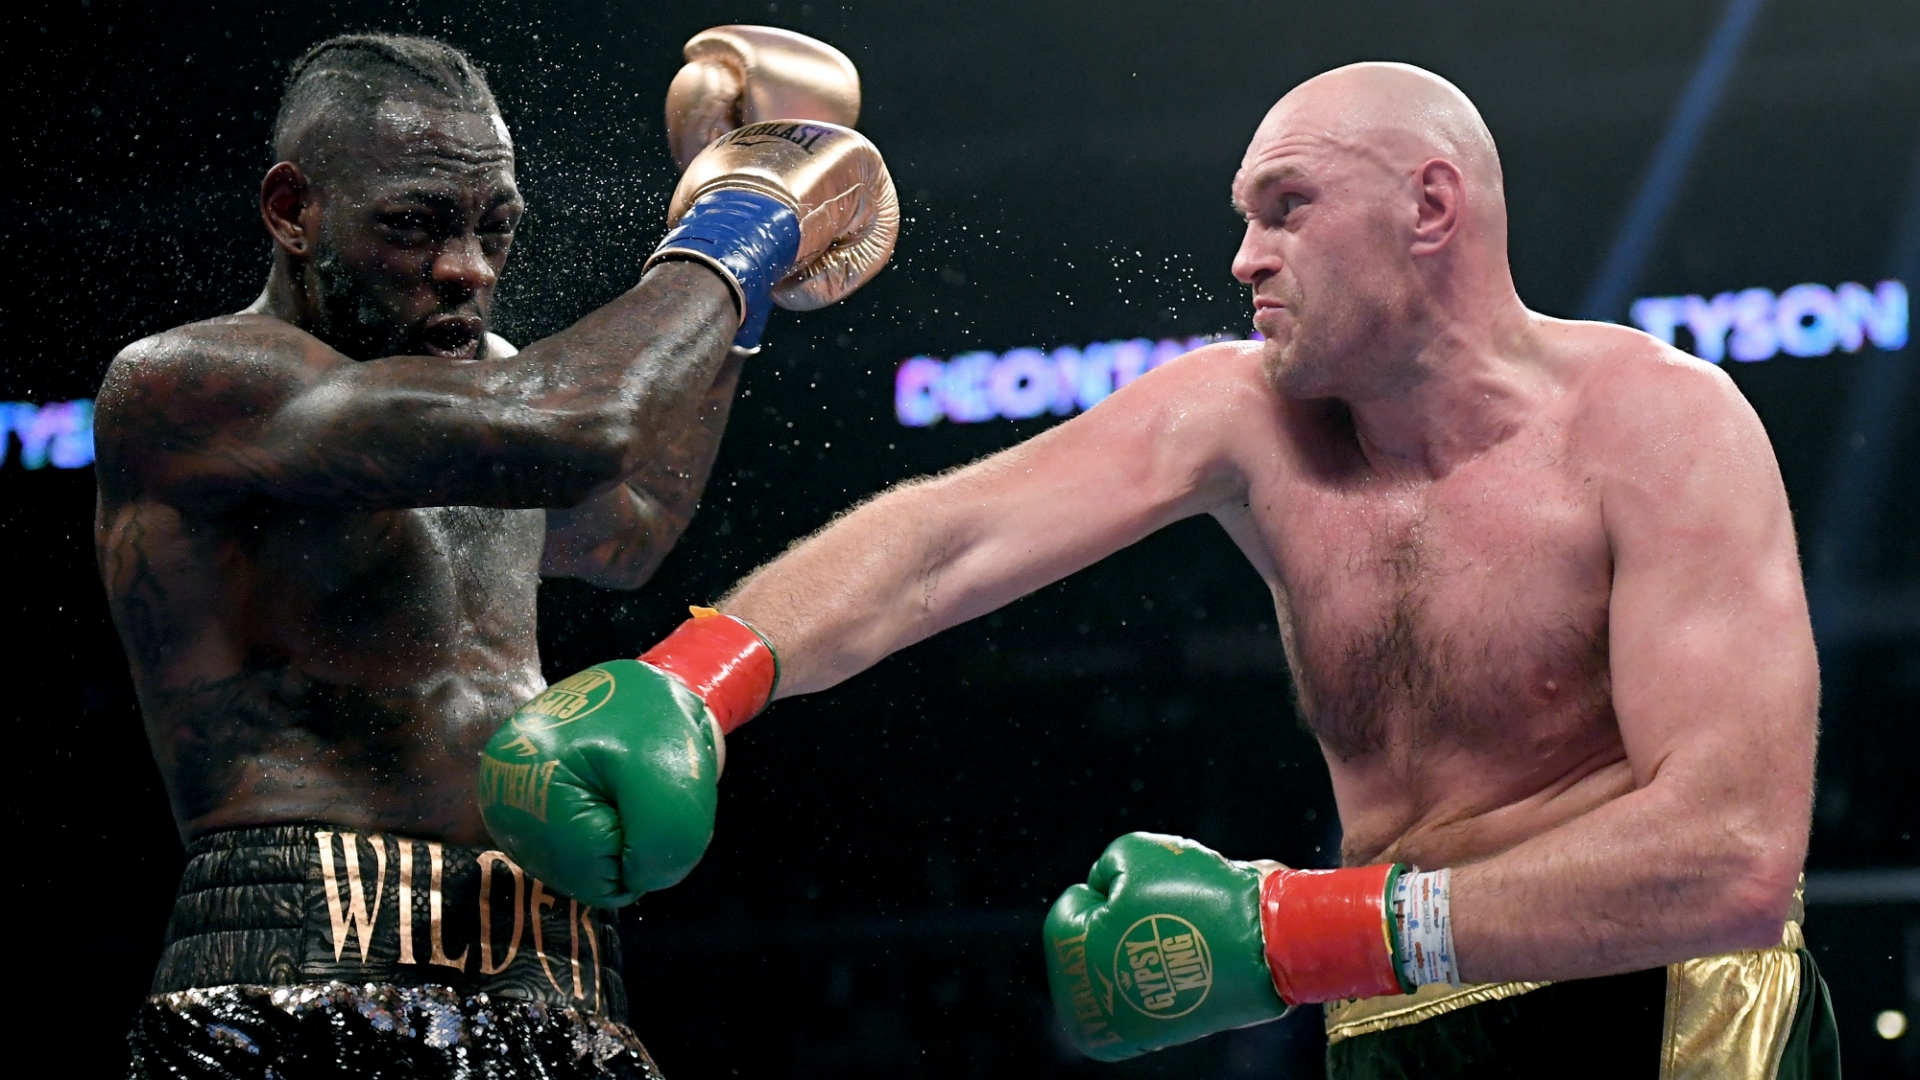 Tyson Fury expects Deontay Wilder rematch in March or April 2020 - The Ring